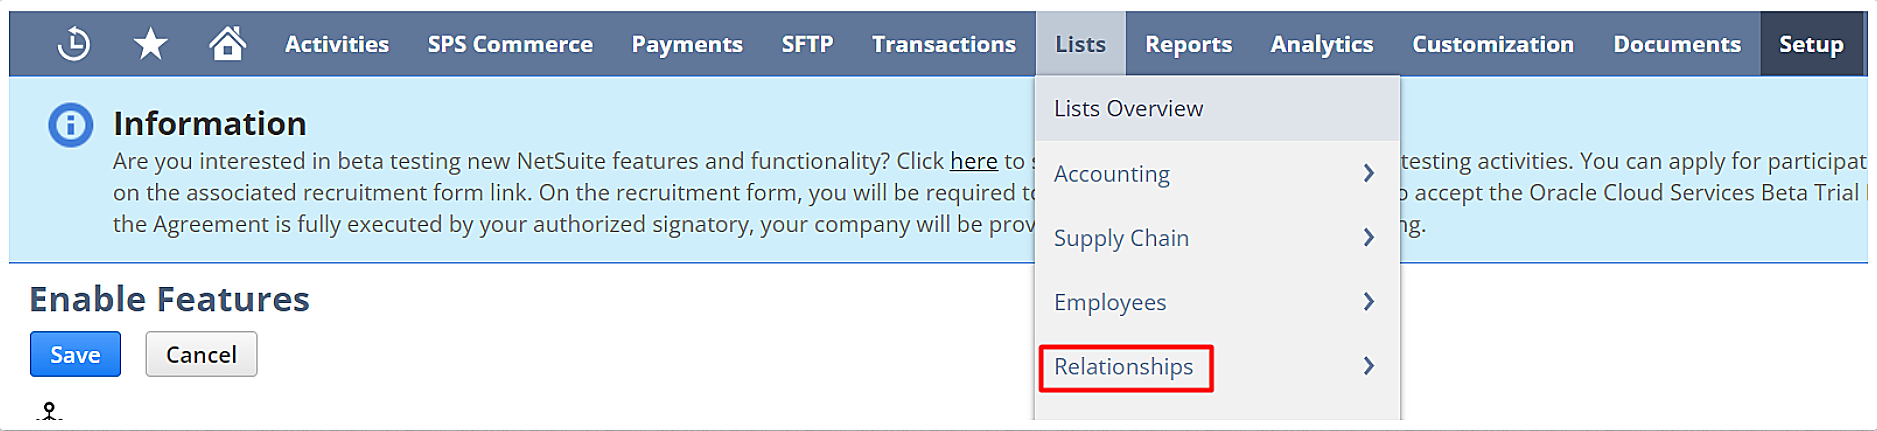 Go to “Lists” on the NetSuite Dashboard. Click on “Relationships”